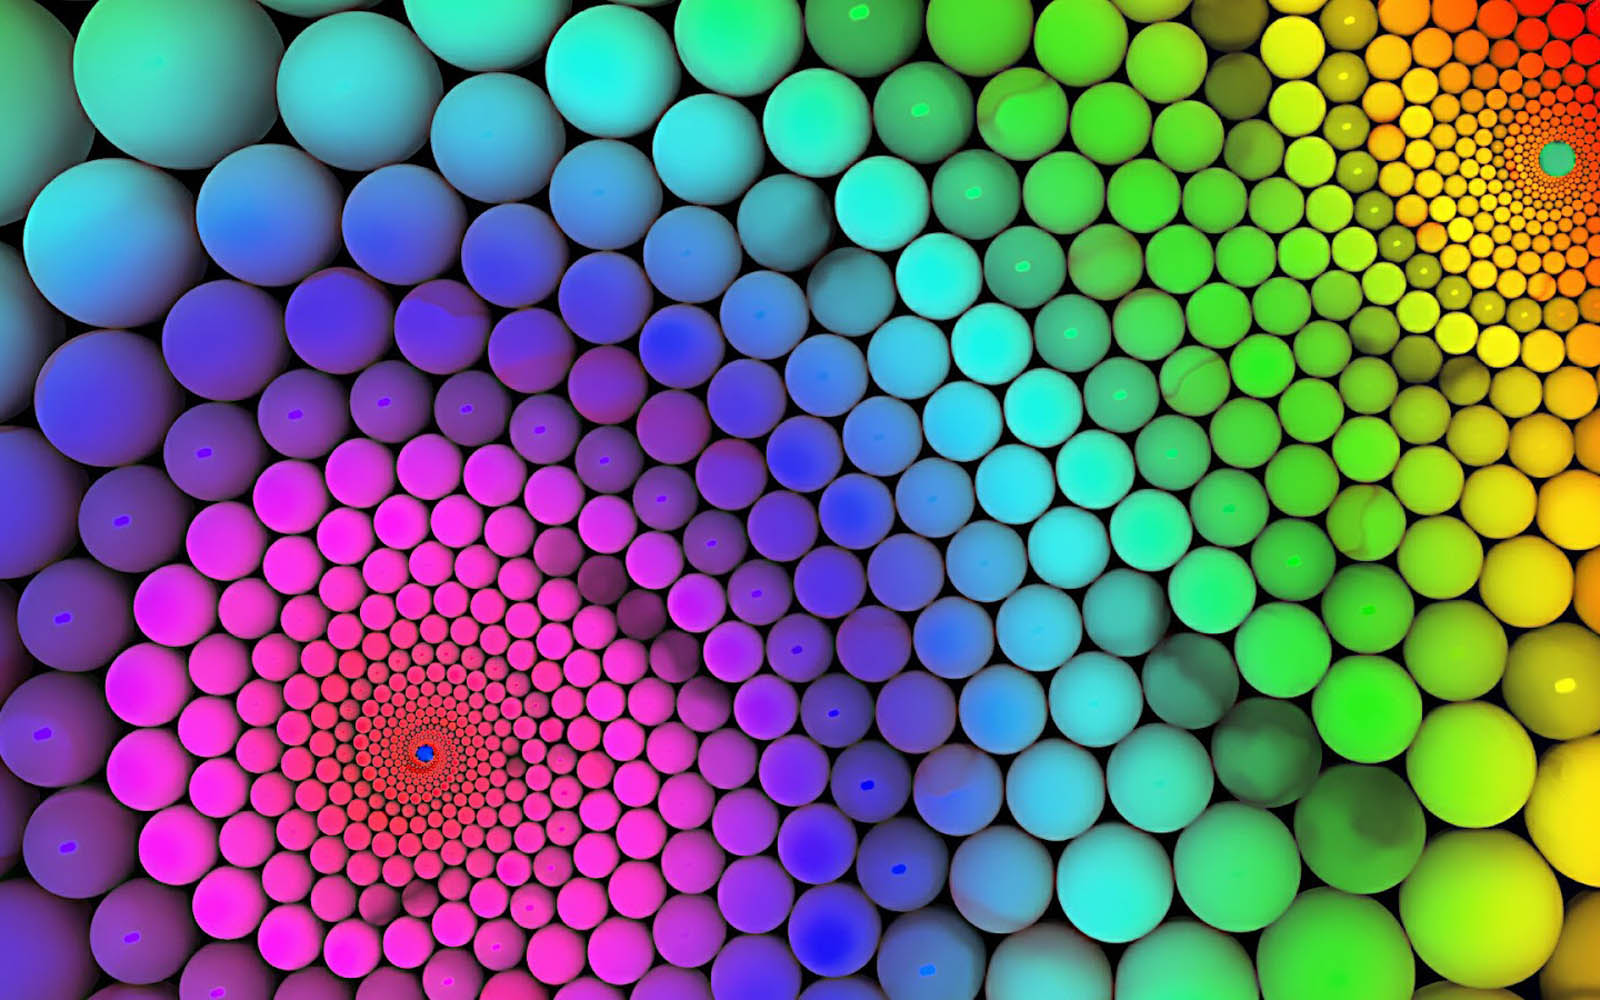 modern background wallpaper,circle,colorfulness,symmetry,pattern,psychedelic art